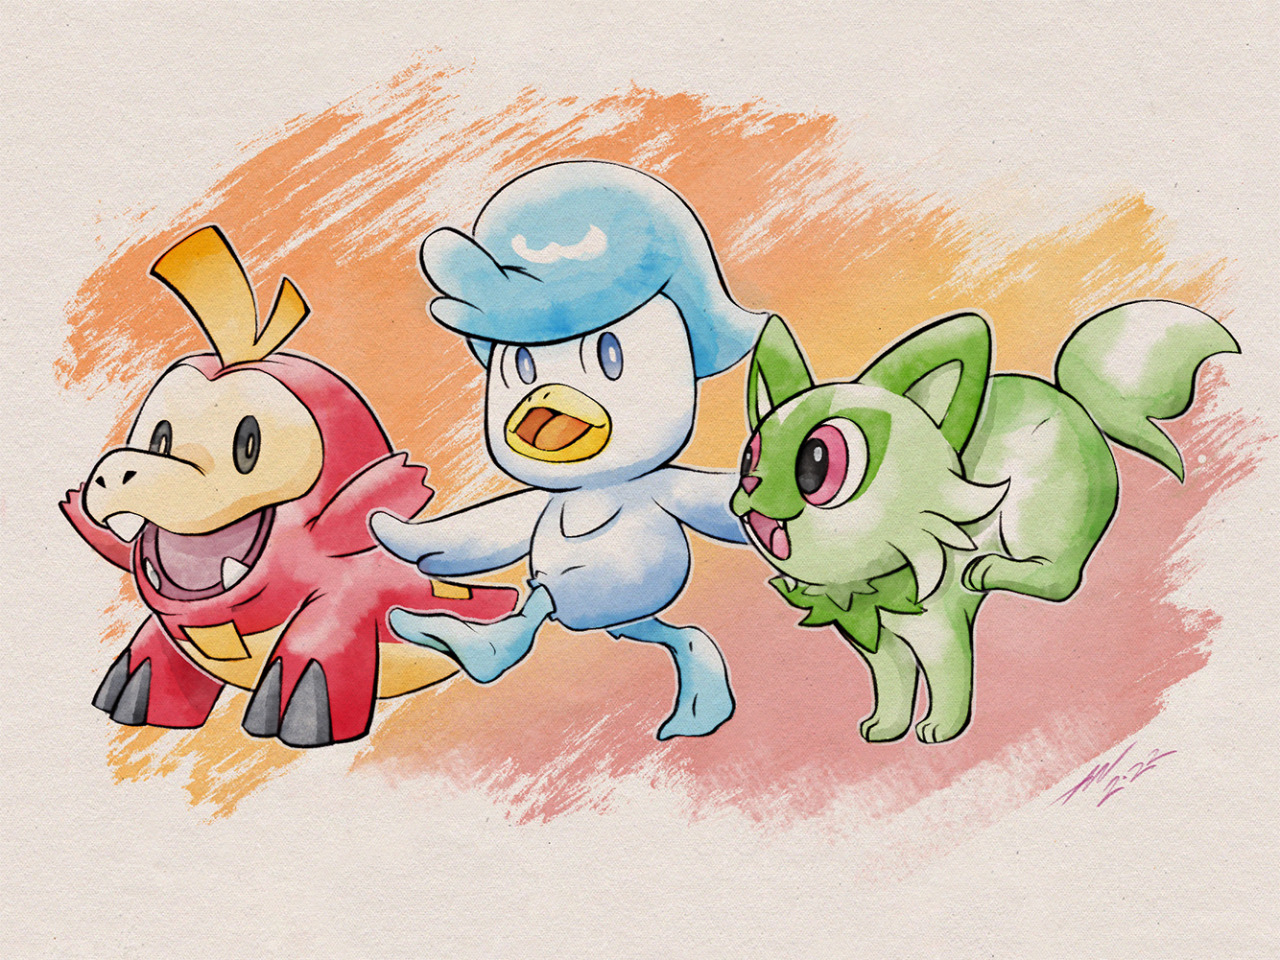 OC] I just love to emulate Ken Sugimori water color style. WhT do u guys  think of this style? : r/pokemon